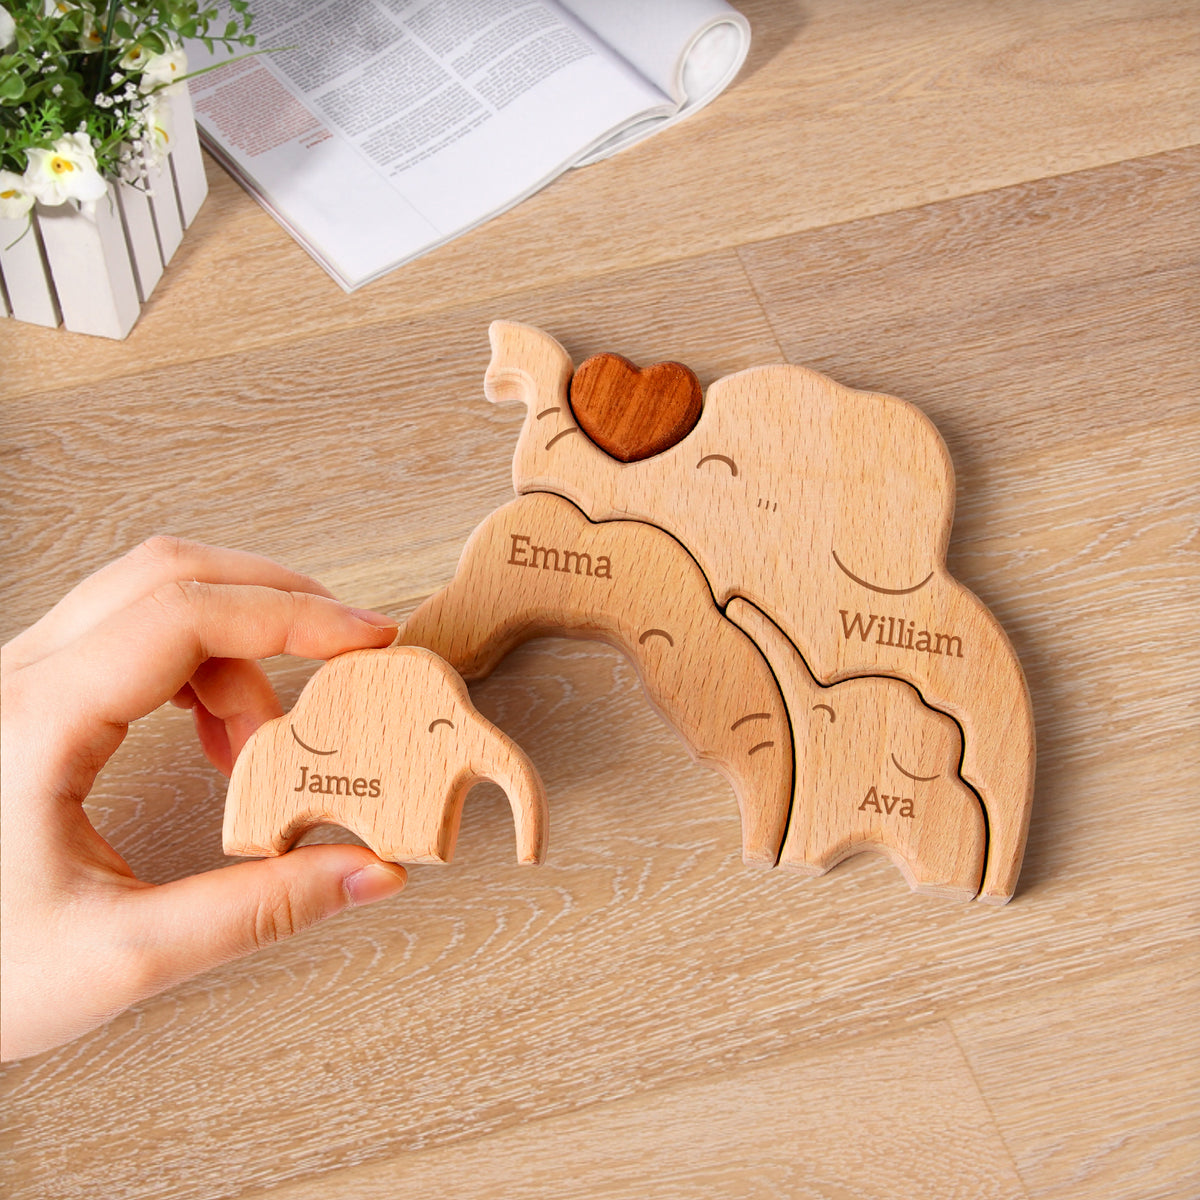 Elephant Family Puzzle, Personalized Wooden Puzzles with 2-5 Family Members Names, Unique Family Decor Wood Sculpture Gifts for Mom Grandma